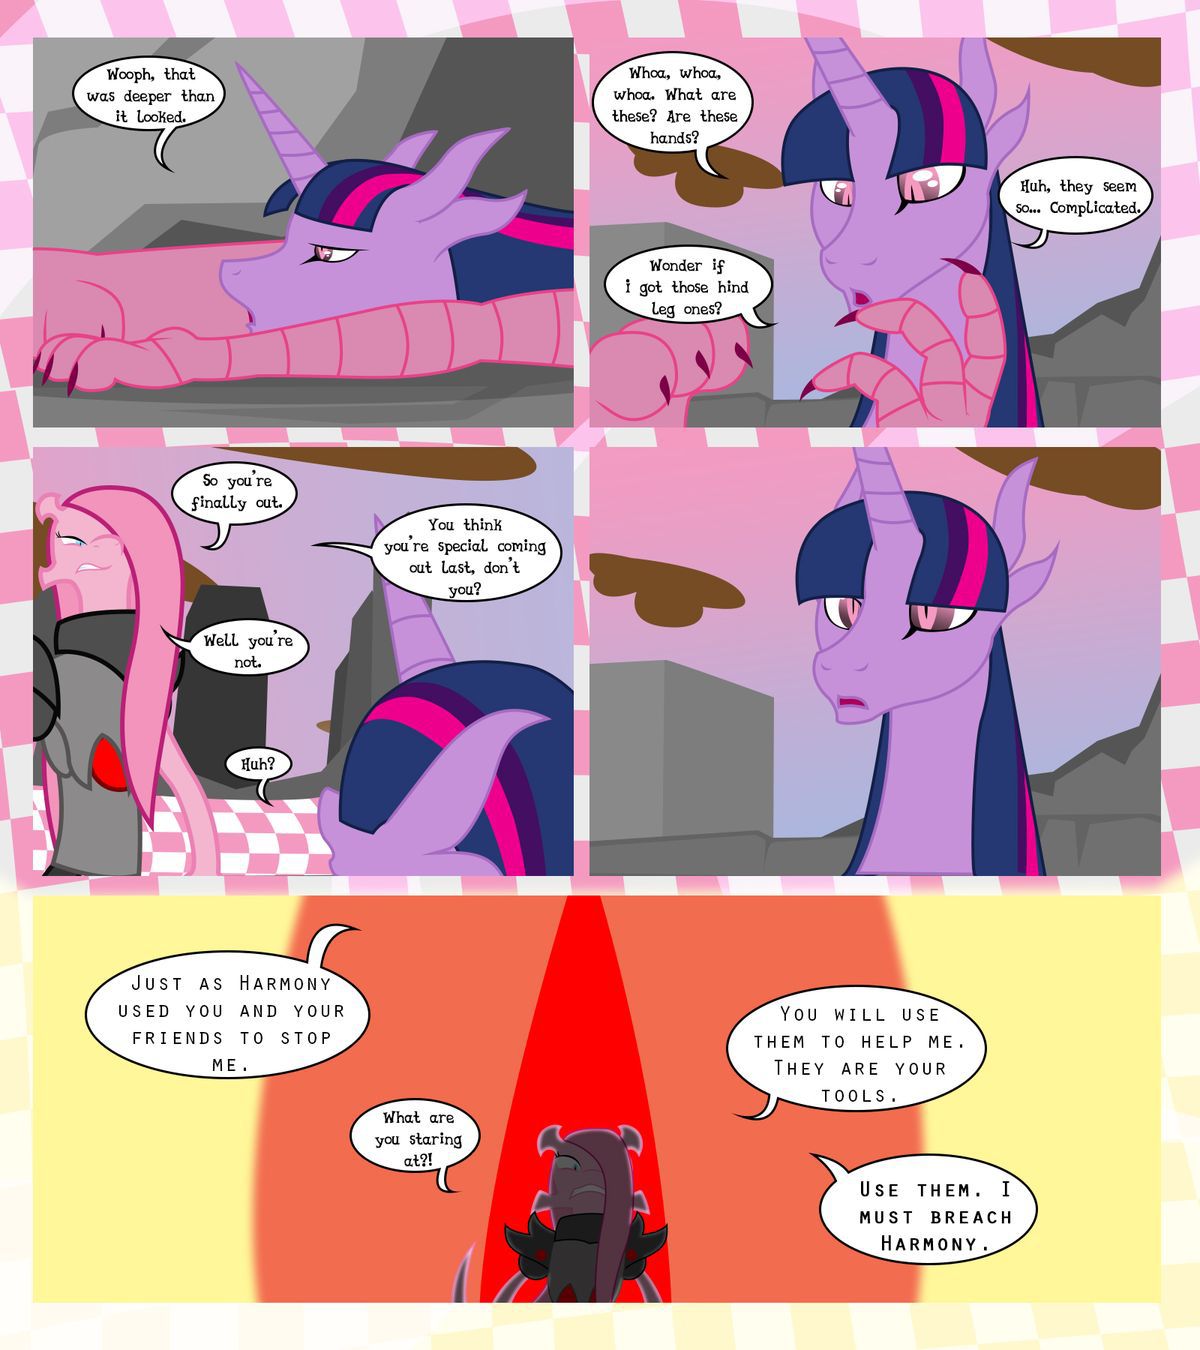 [GatesMcCloud] Cutie Mark Crusaders 10k: Chapter 3 - The Lost (My Little Pony: Friendship is Magic) [English] [Ongoing] 11